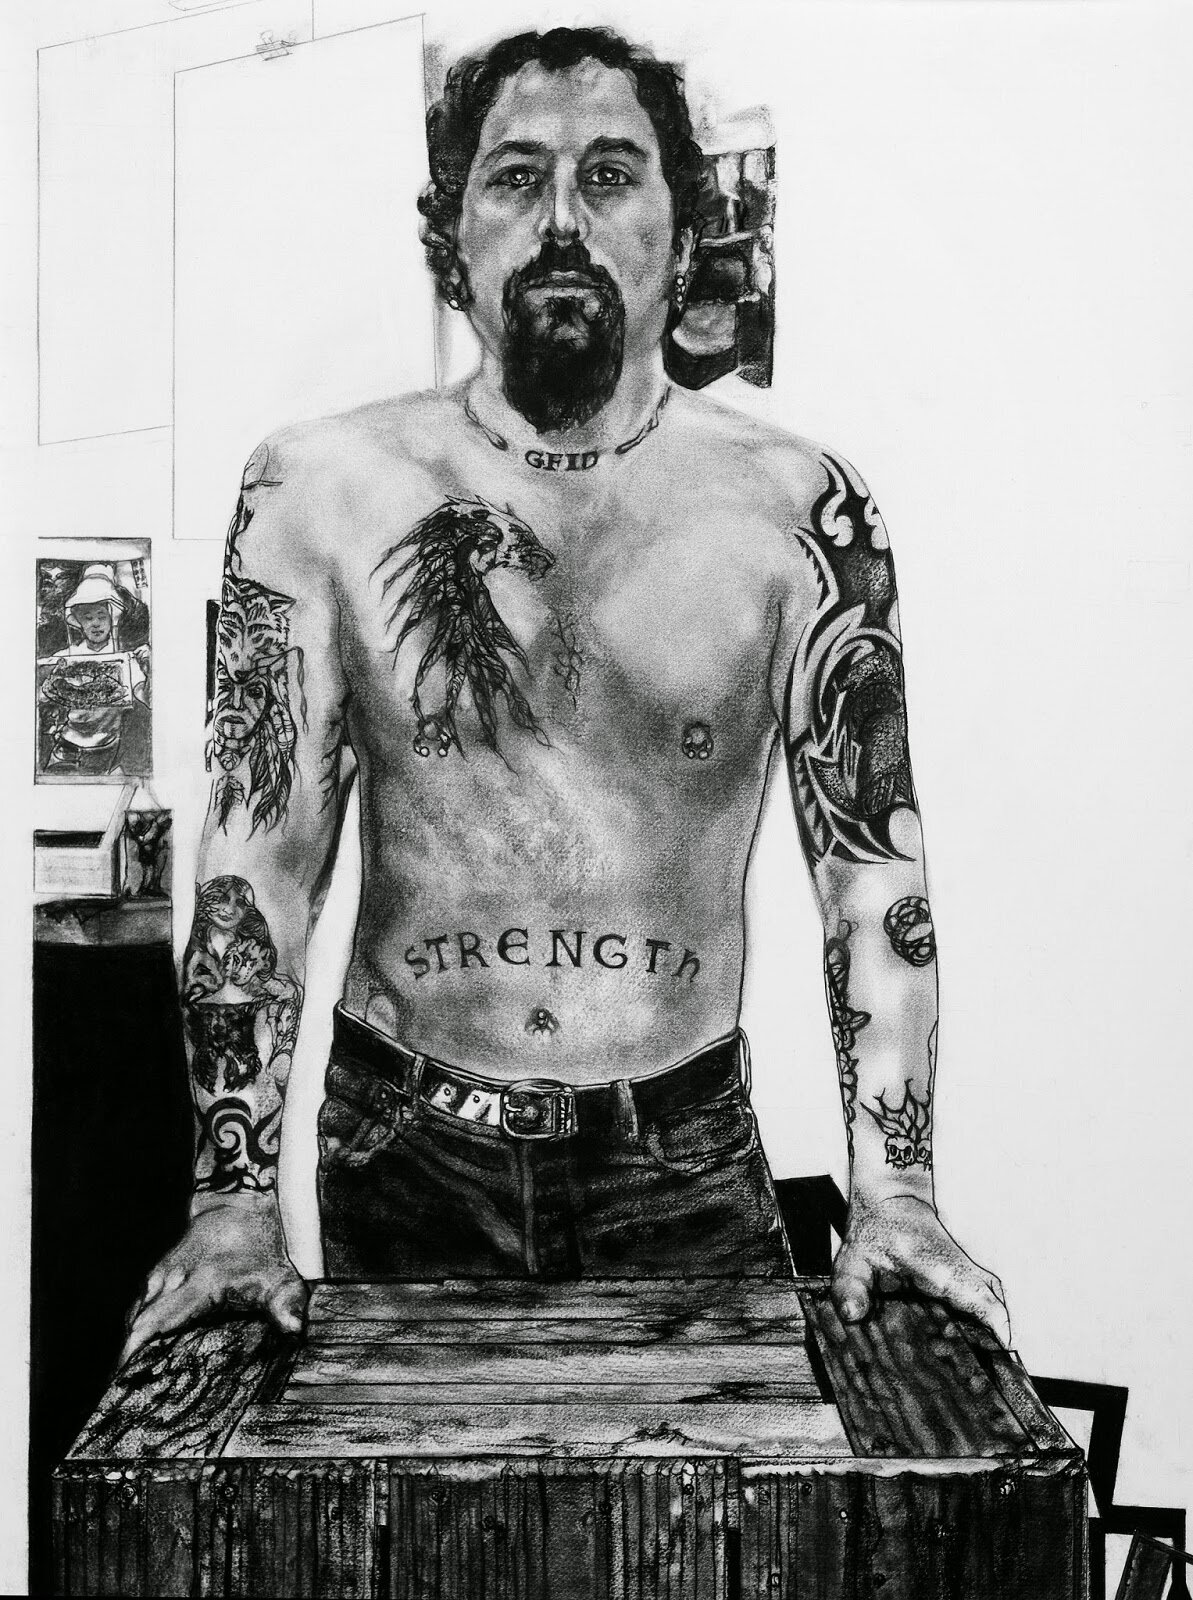  Mary Spencer,  Jay showing his Ink,  Charcoal on Rag Paper, 30”x 22” 